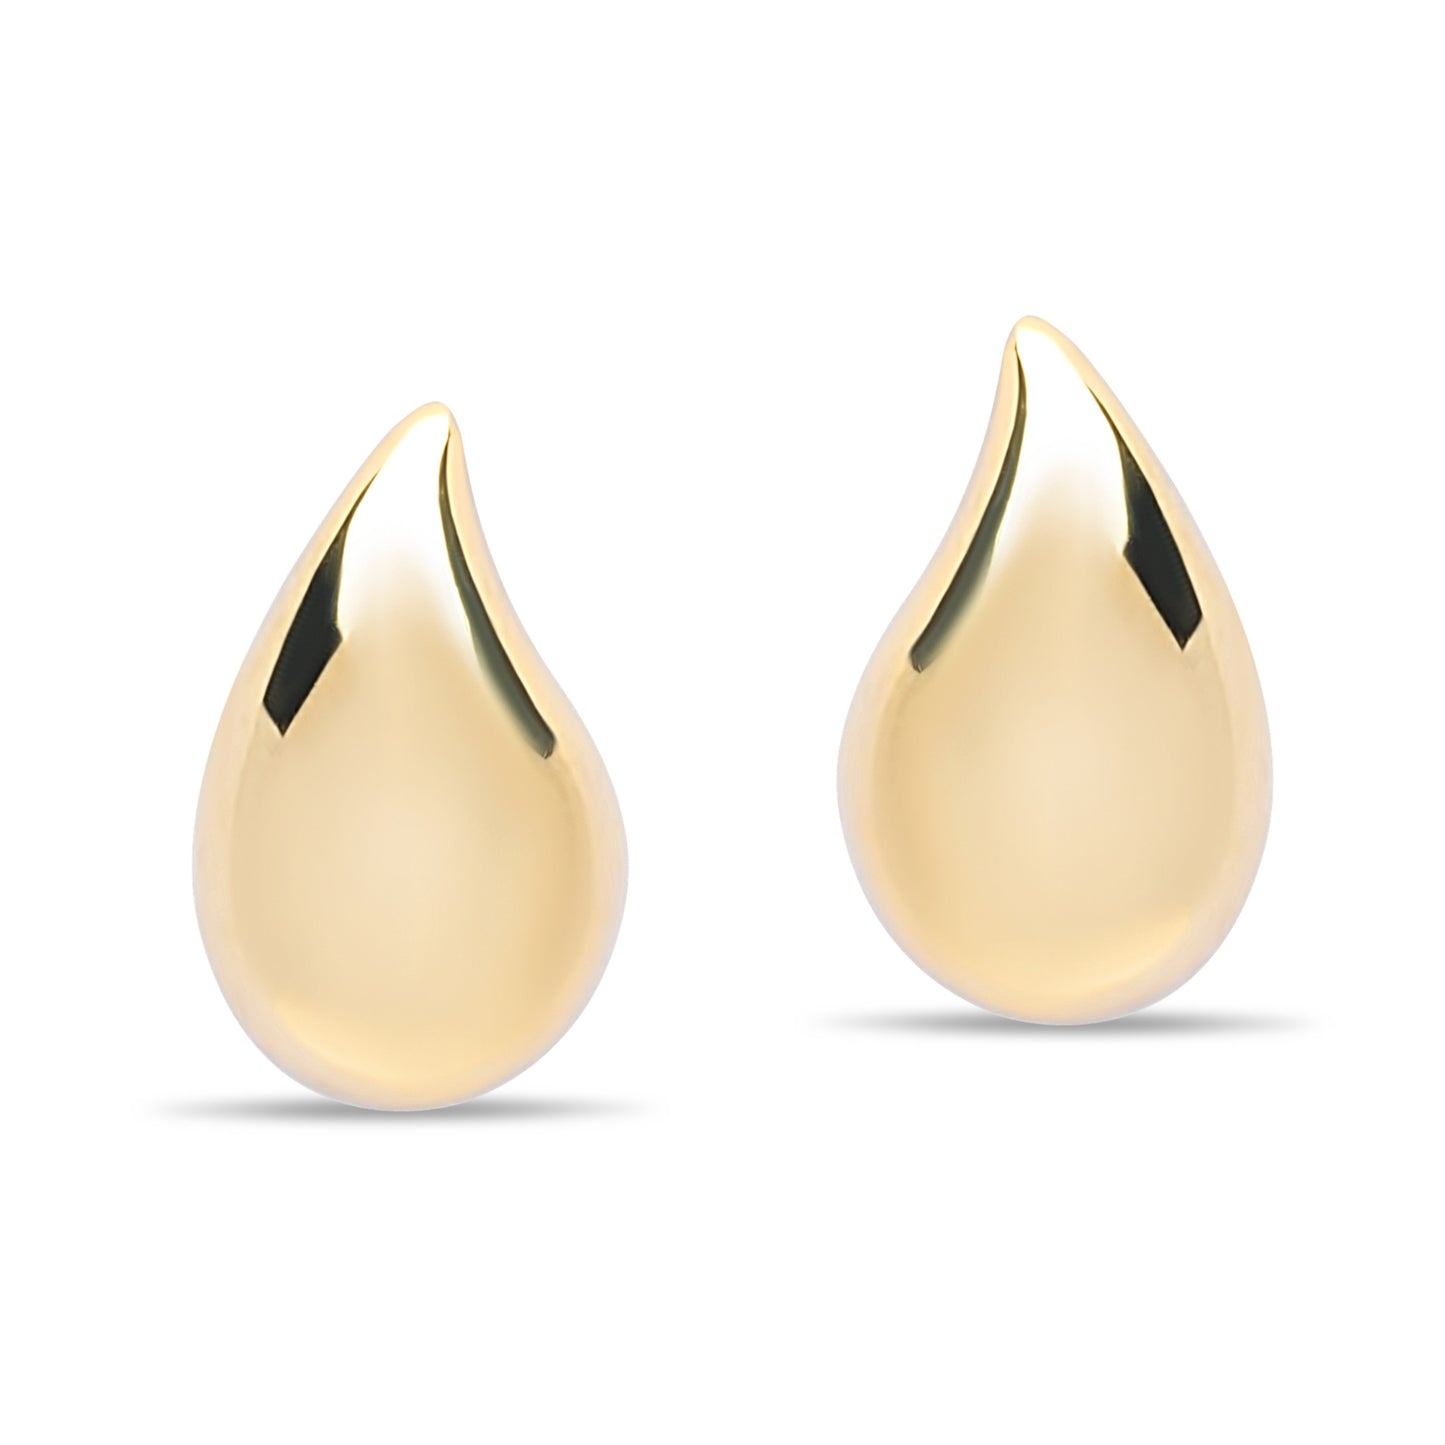 Large Solid Tear Stud Pair Earrings - Gold Plated